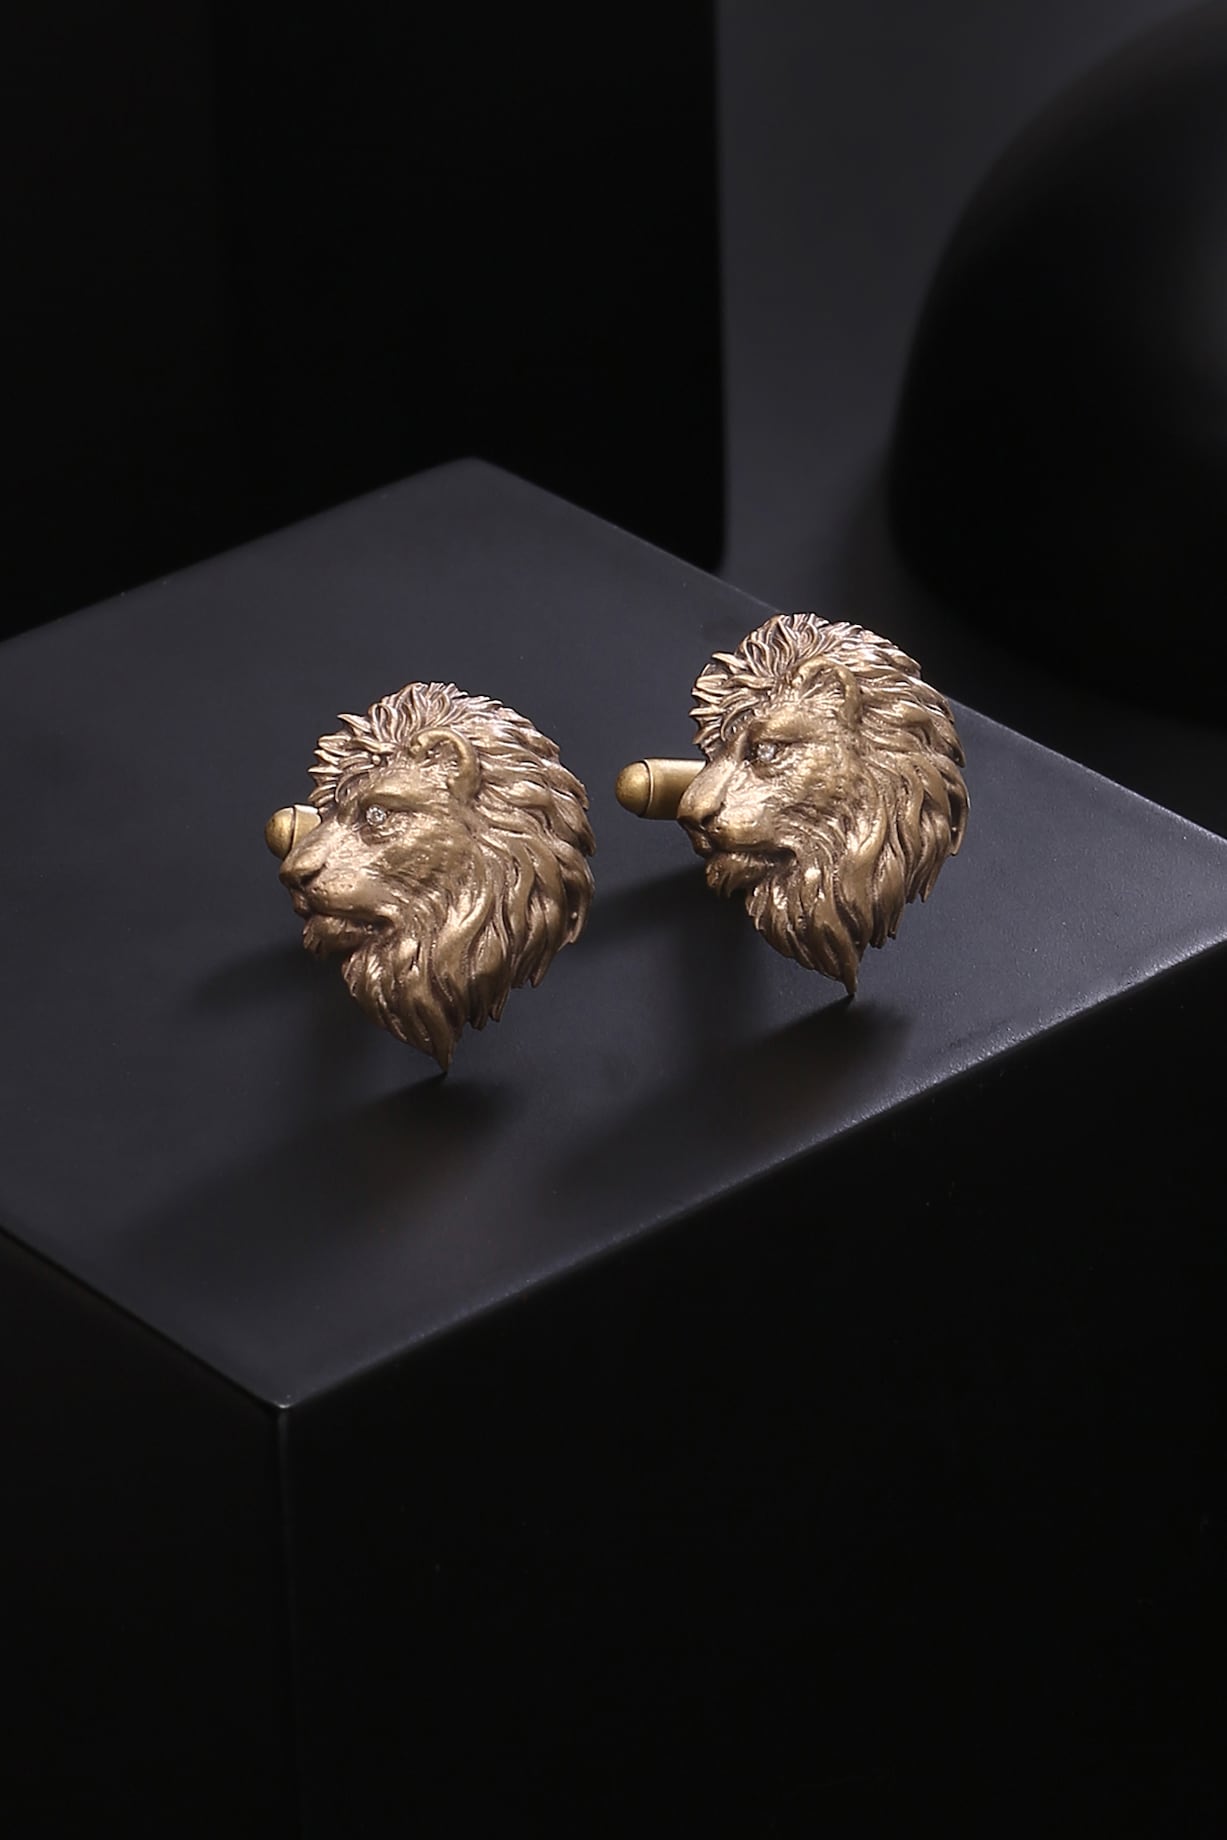 Antique Gold Royal Side Lion Cufflinks With Lapel Pin Design by Cosa Nostraa  at Pernia's Pop Up Shop 2024